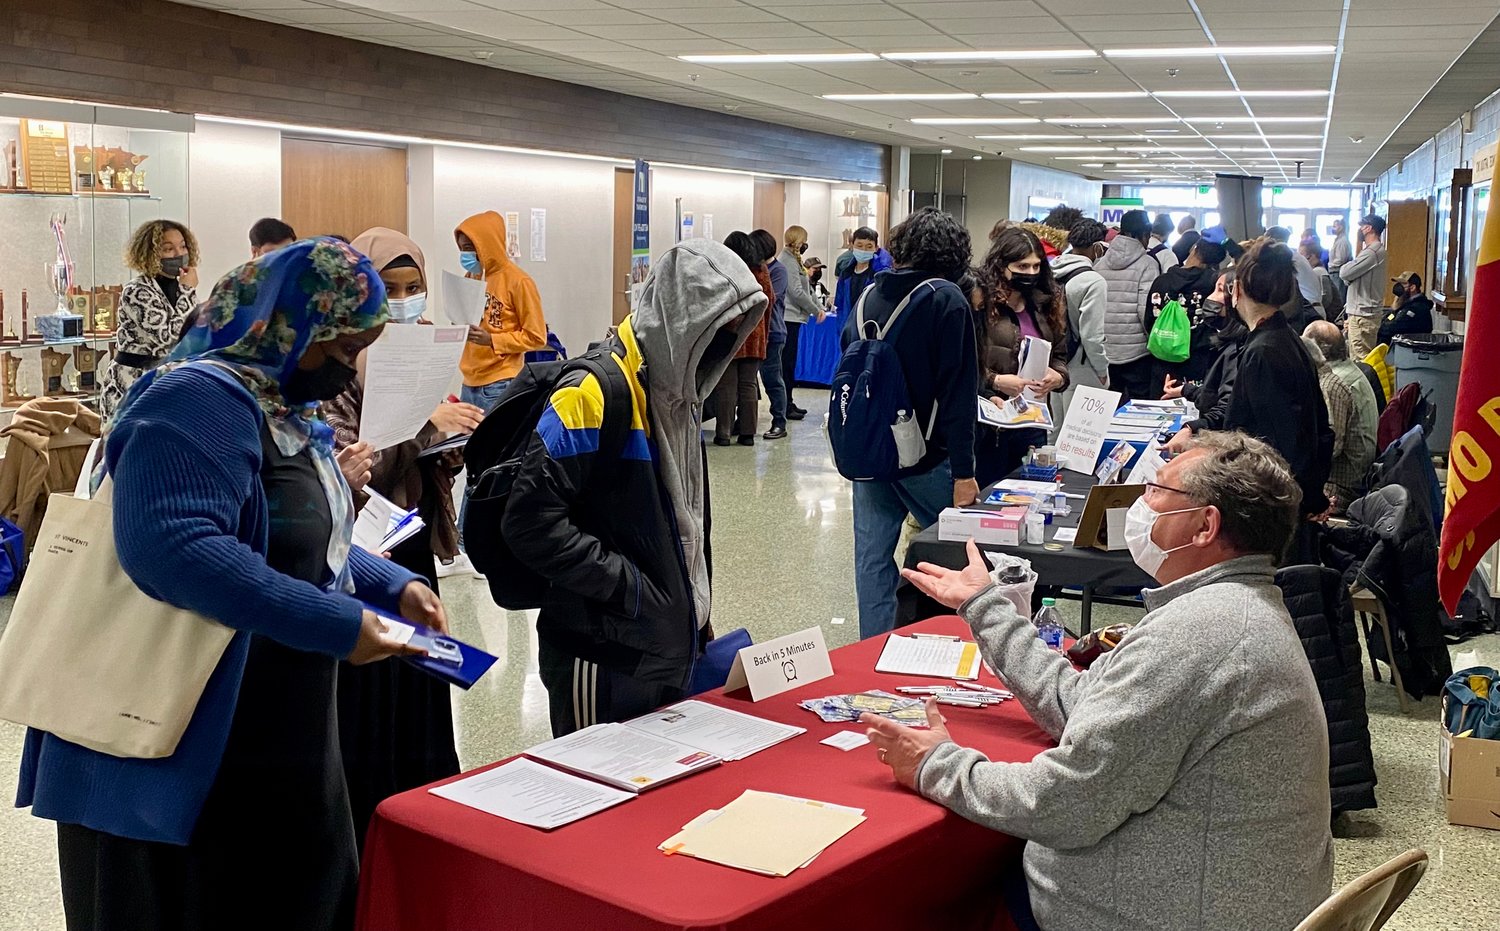 Students participated in a career fair at Como Park High School on Feb. 23. (Photo by Eric Erickson)